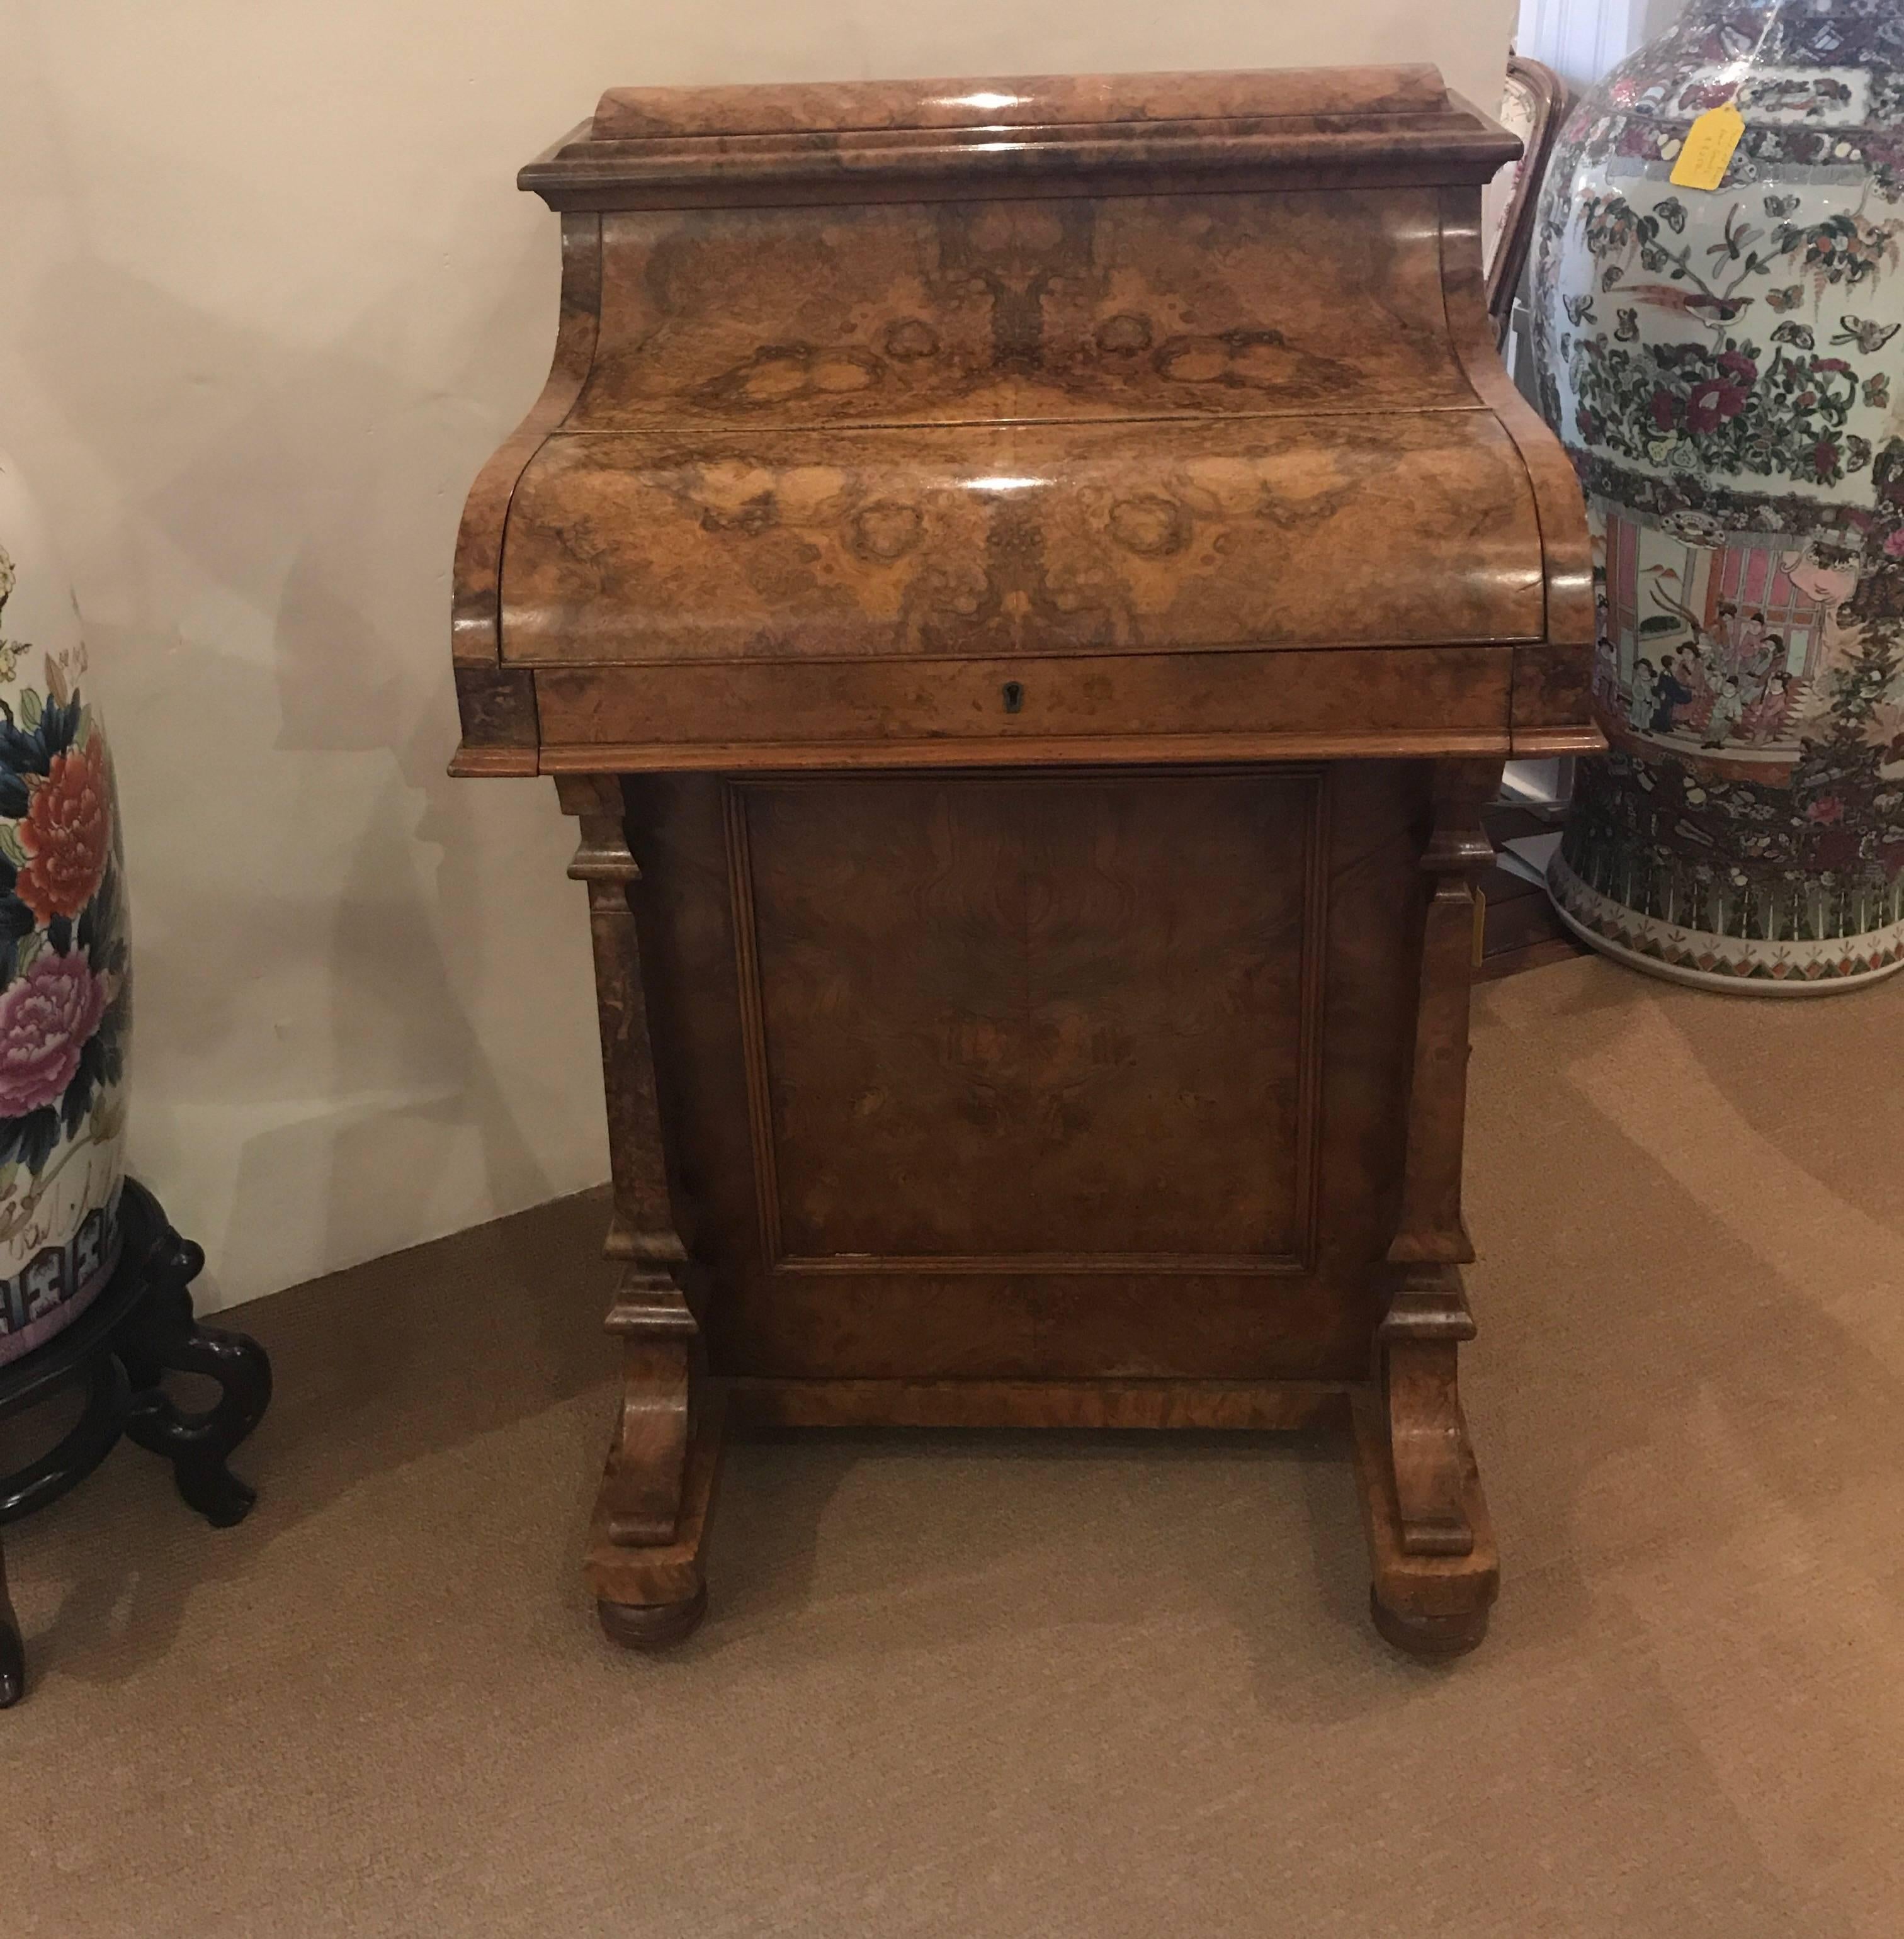 Exceptional quality English Davenport desk in burl walnut.  The smokey burl grain with recent French polish.  The desk has many drawers and compartments and a flip front to revel and original dark green leather writing surface.  The top with a